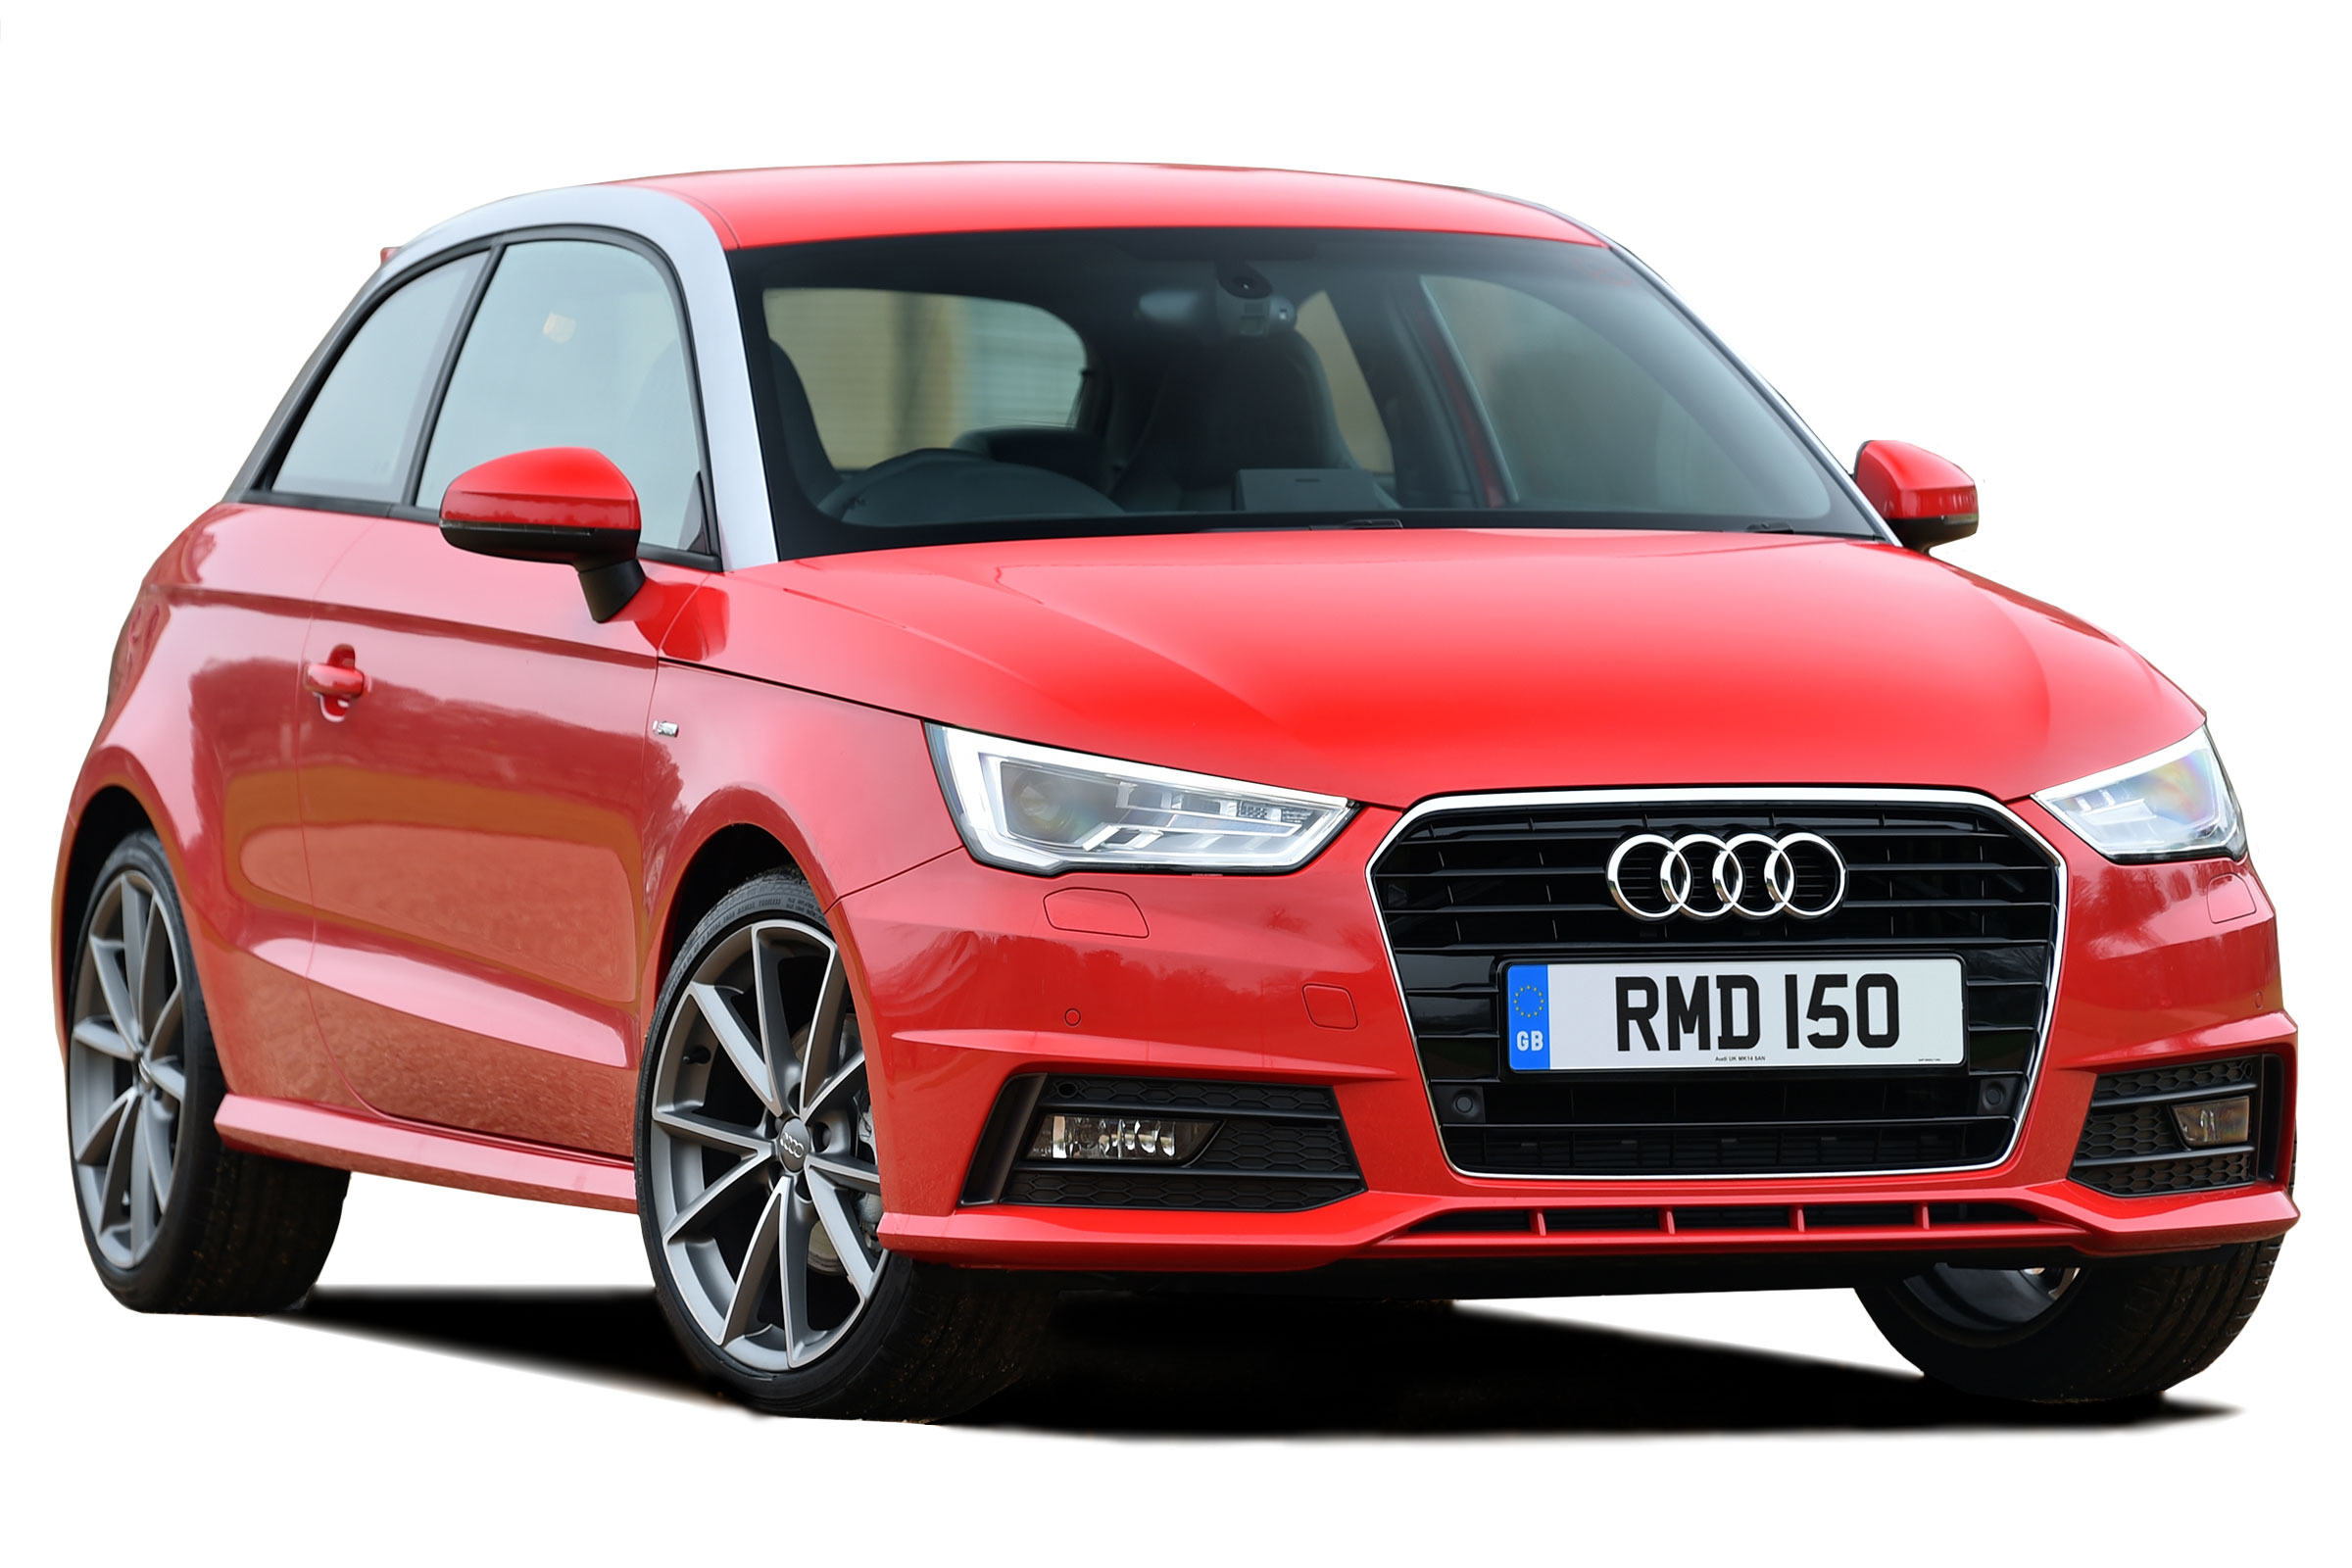 Audi A1 Hatchback 10 18 Owner Reviews Mpg Problems Reliability Carbuyer